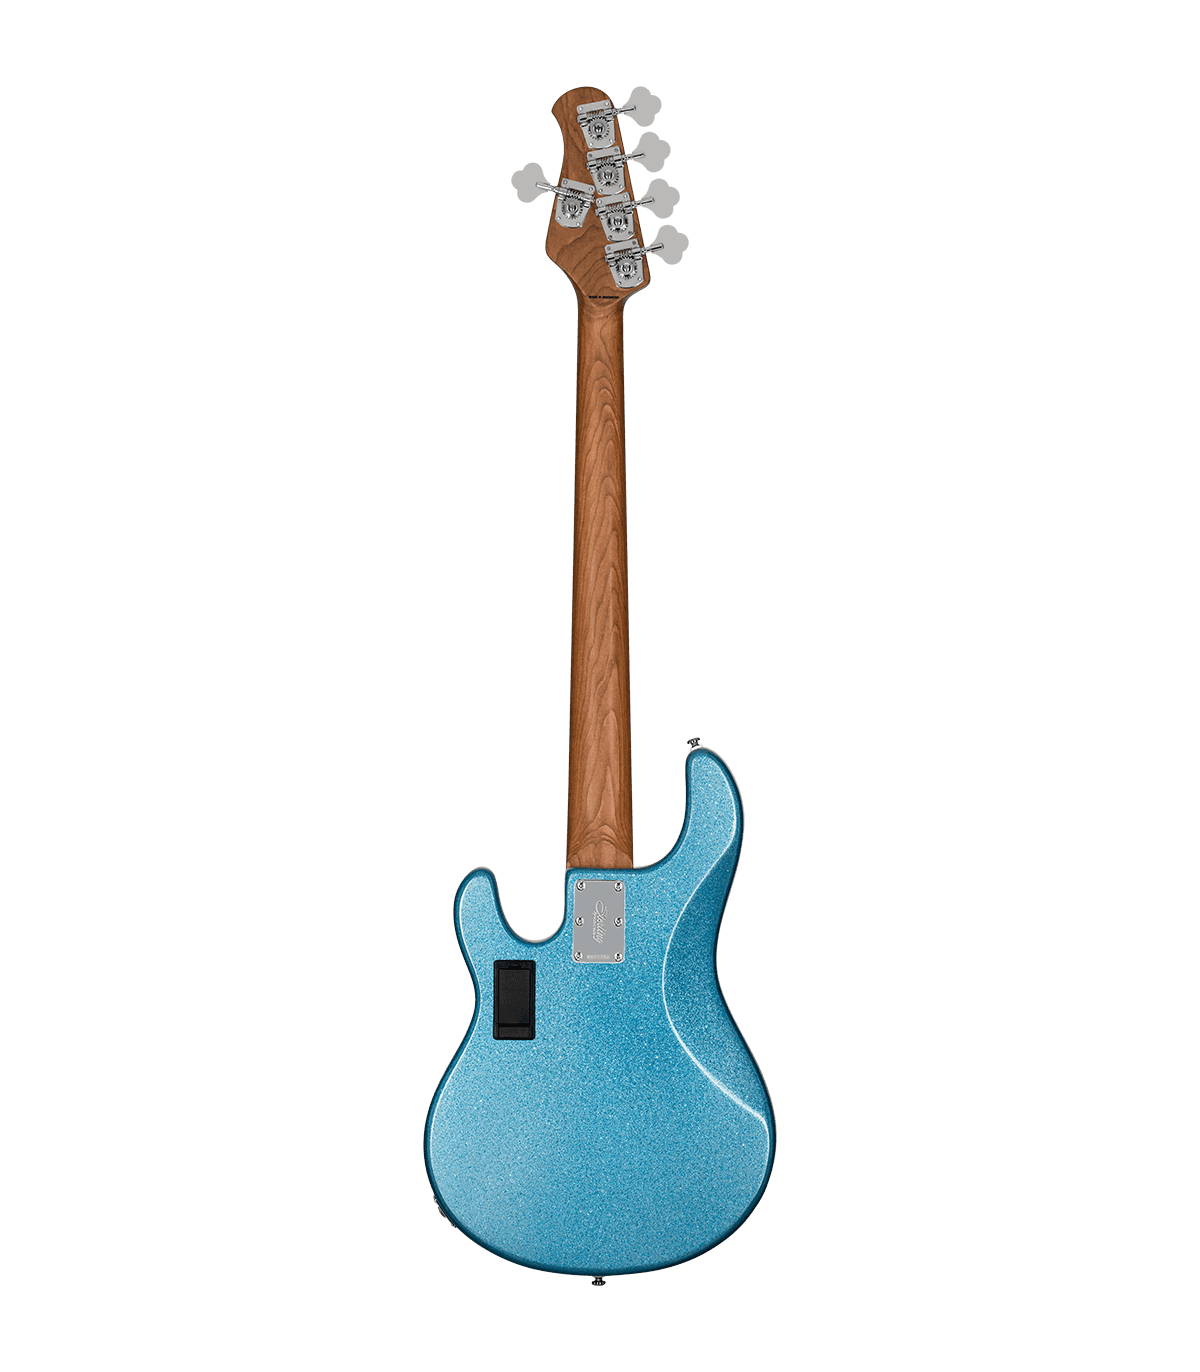 Basse Electrique 5 Cordes STERLING BY MUSIC MAN - RAY35-BSK-M2 - StingRay35  - Blue Sparkle